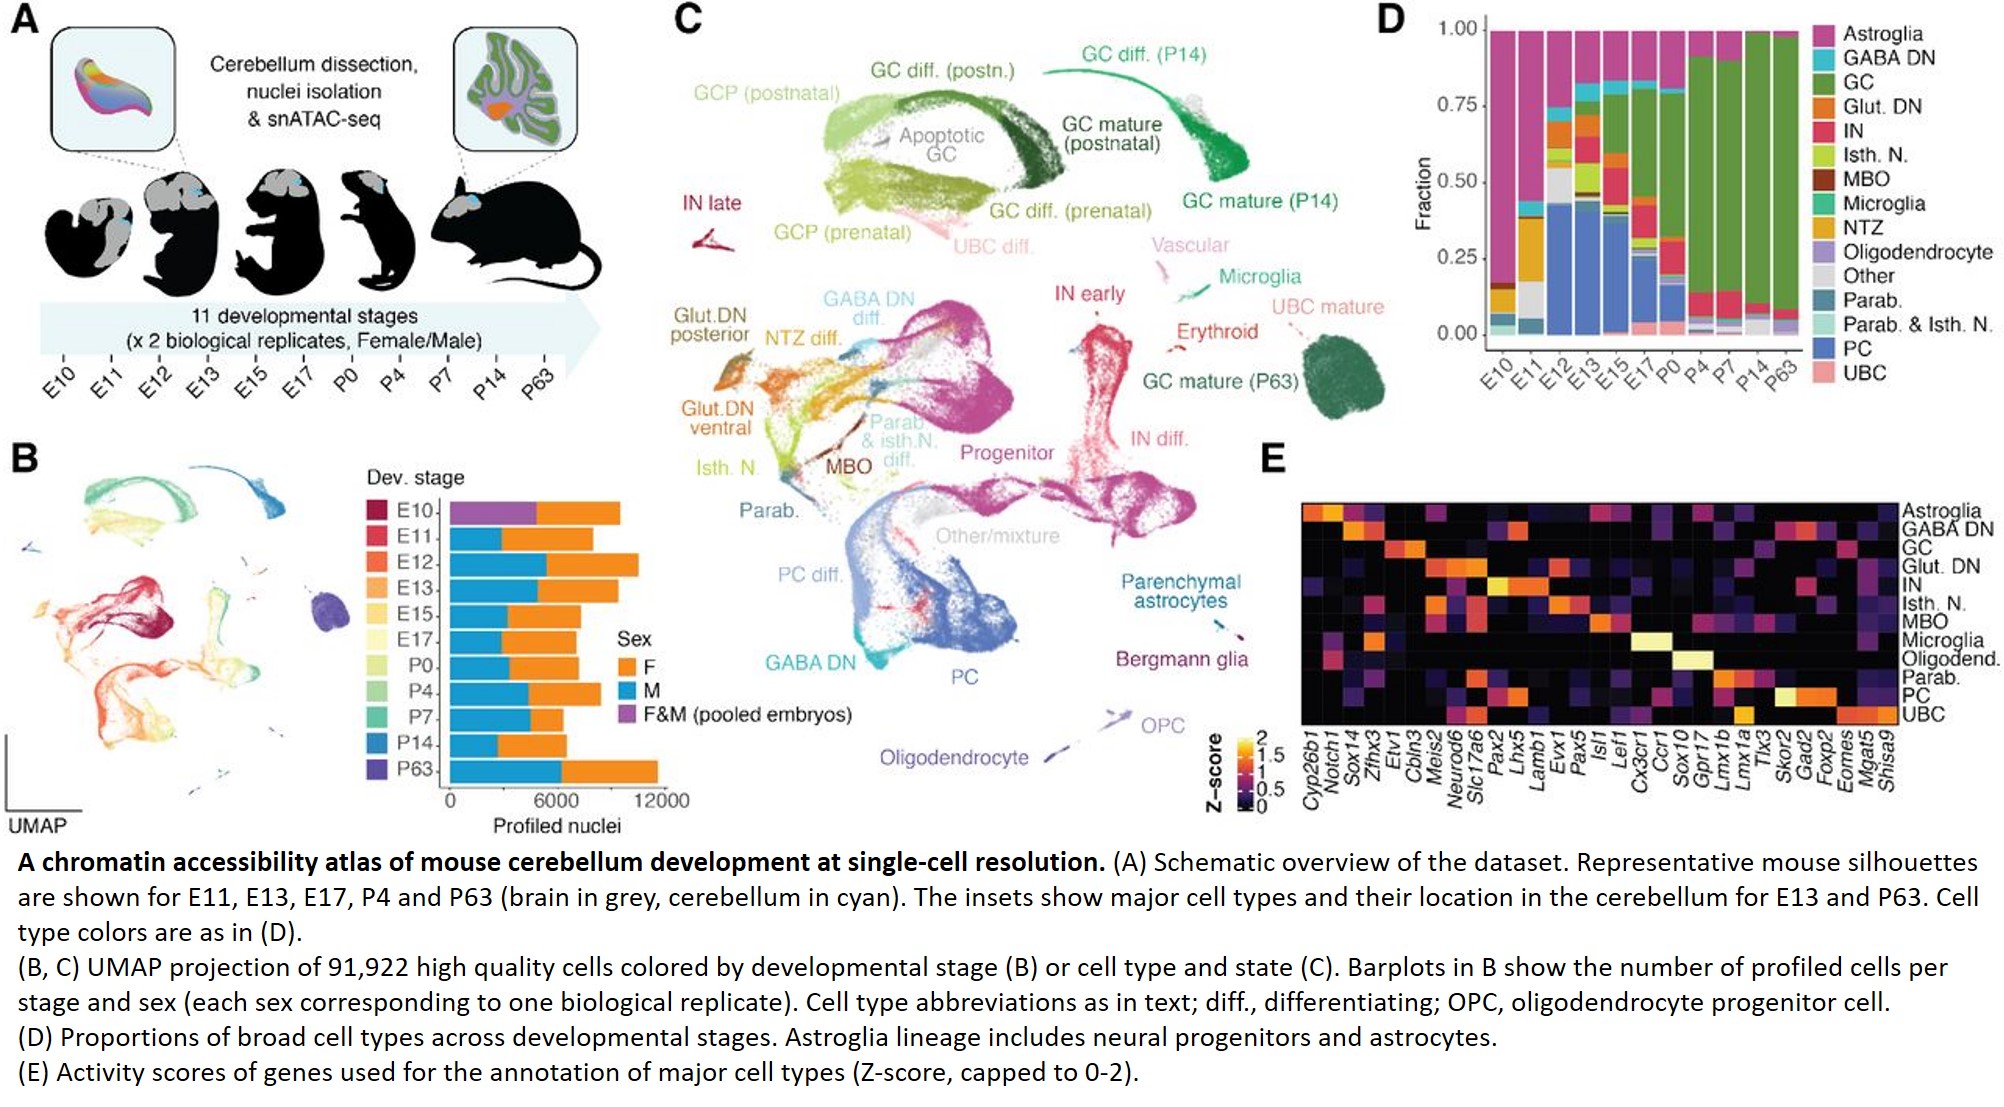 The regulatory landscape of cells in the developing mouse cerebellum